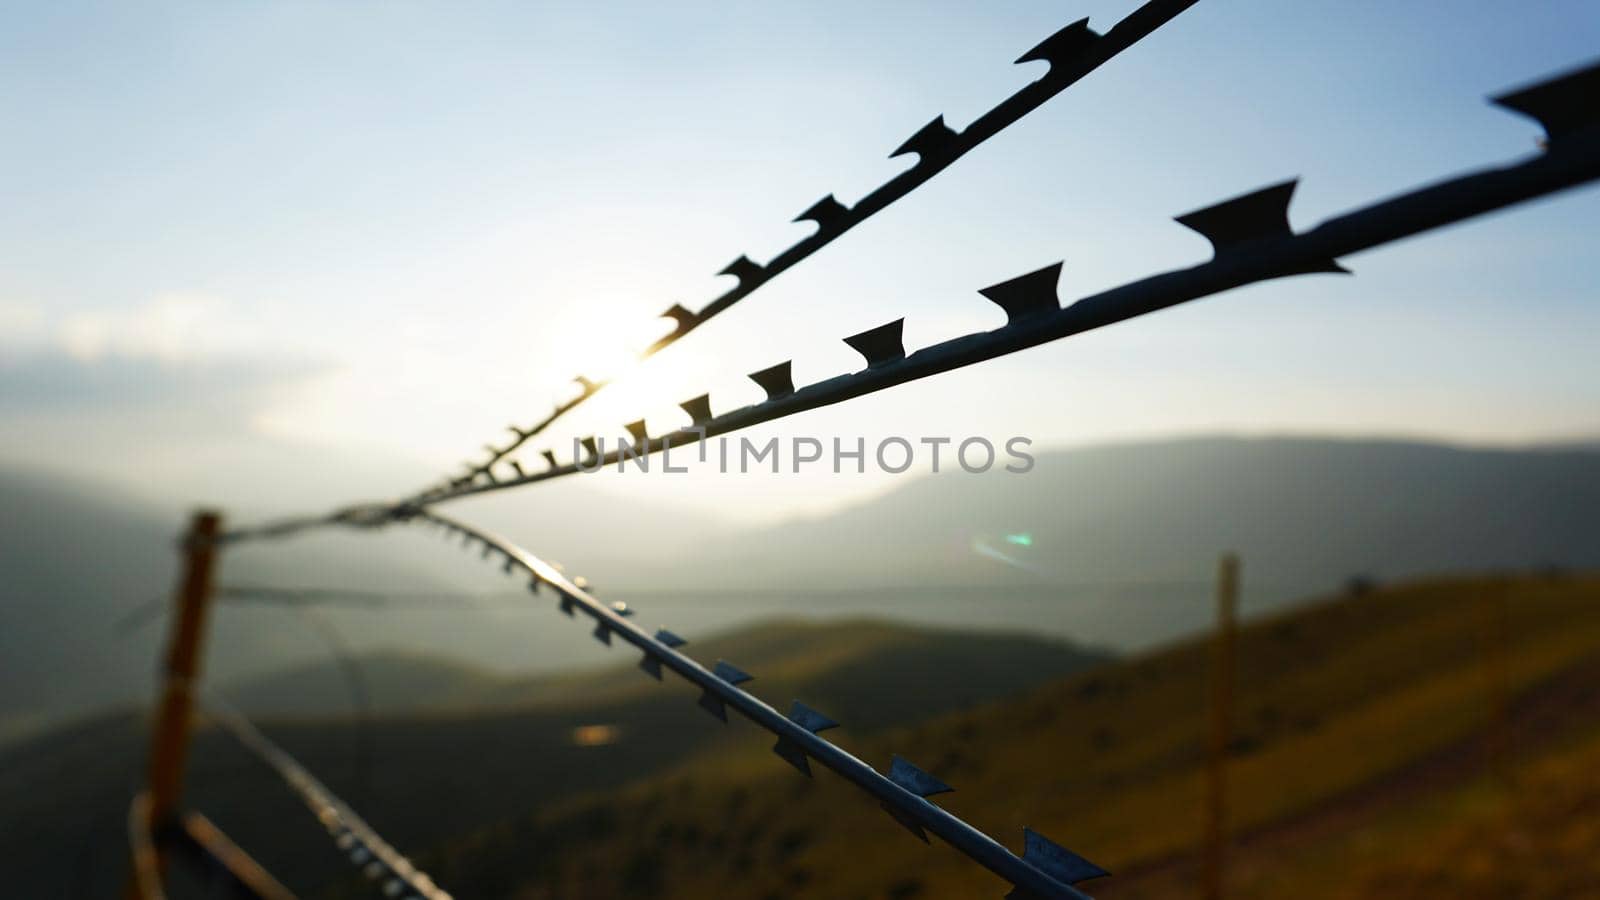 Sharp barbed wire on fence with blurry background by Passcal